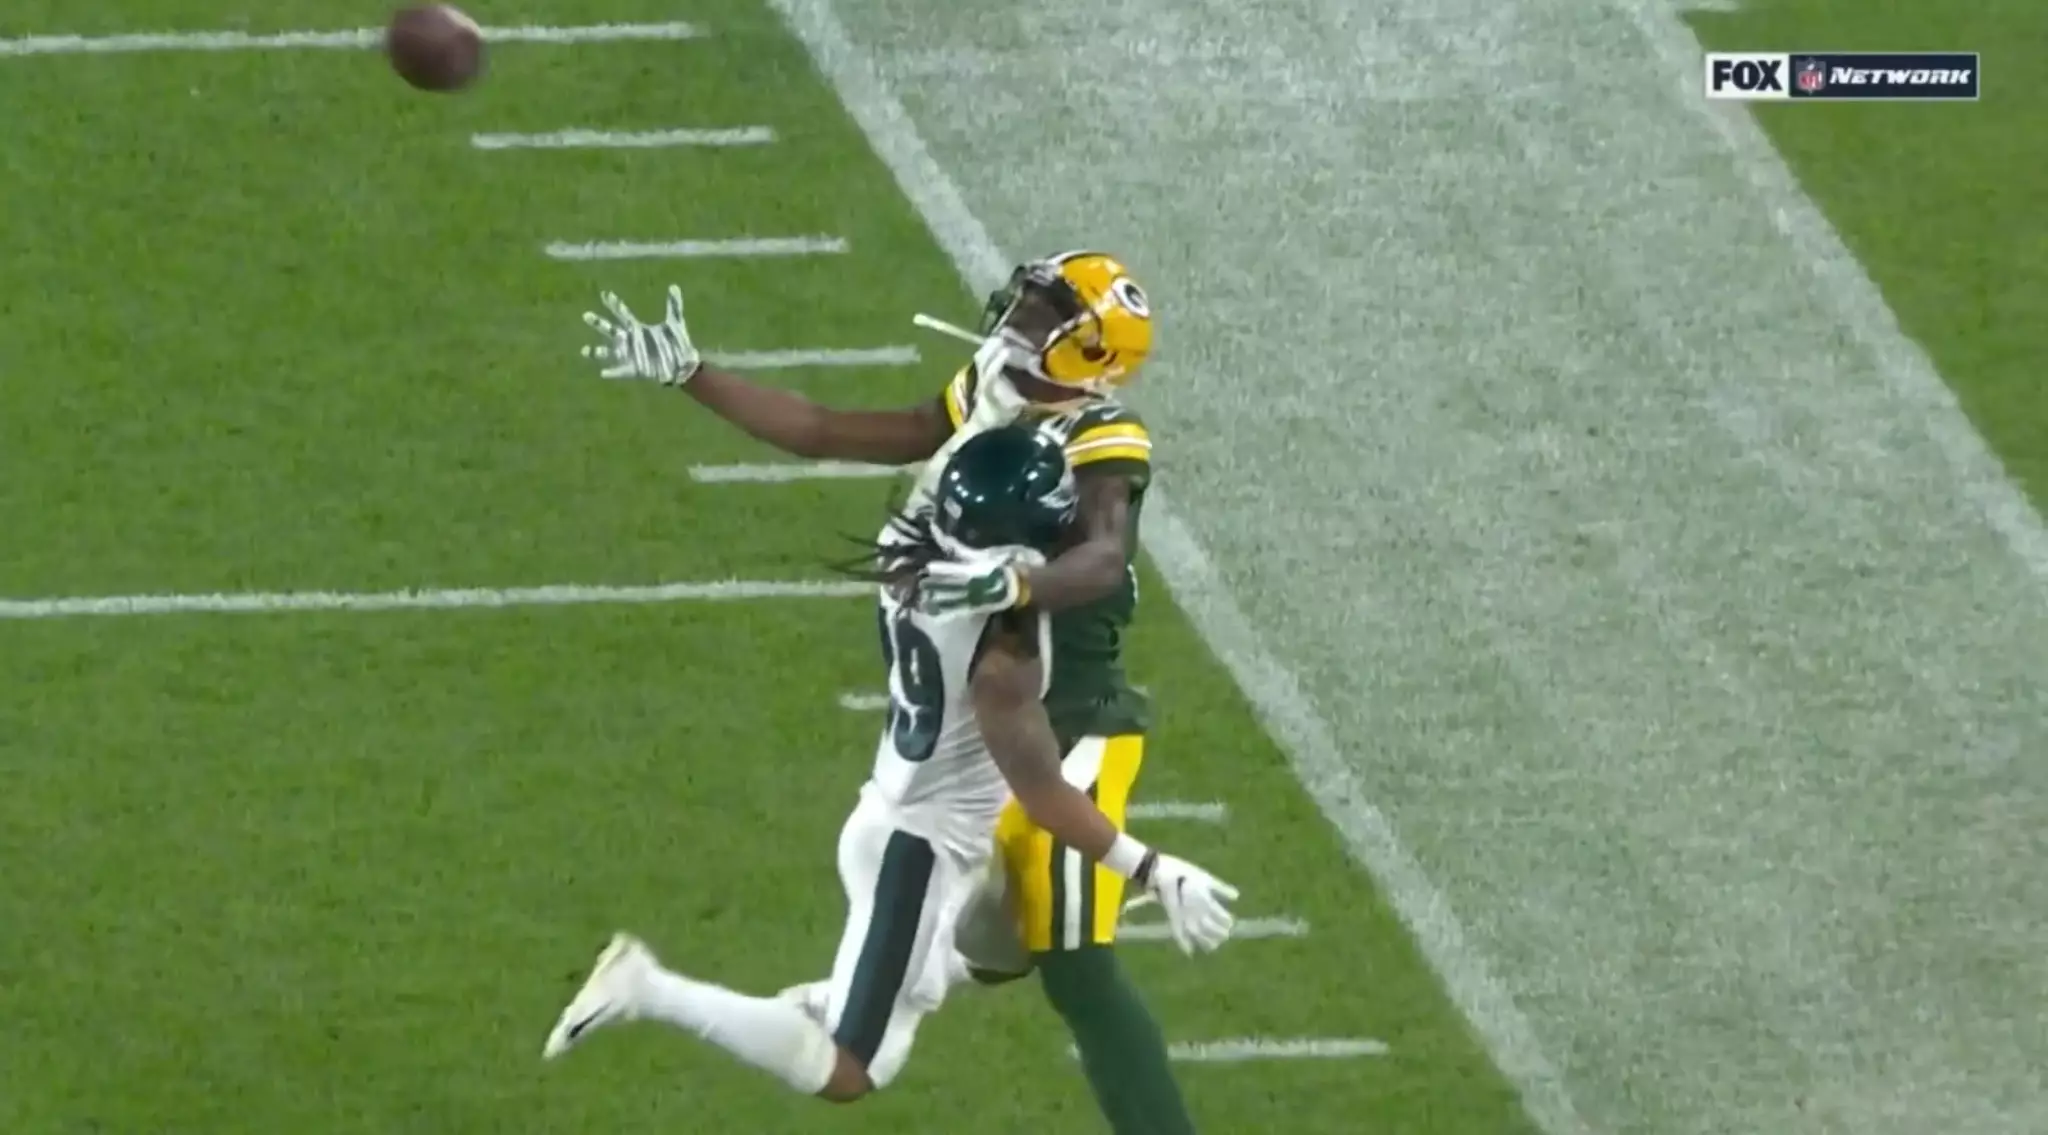 Avonte Maddox seemed to have his hand on Marquez Valdes-Scantling's facemask